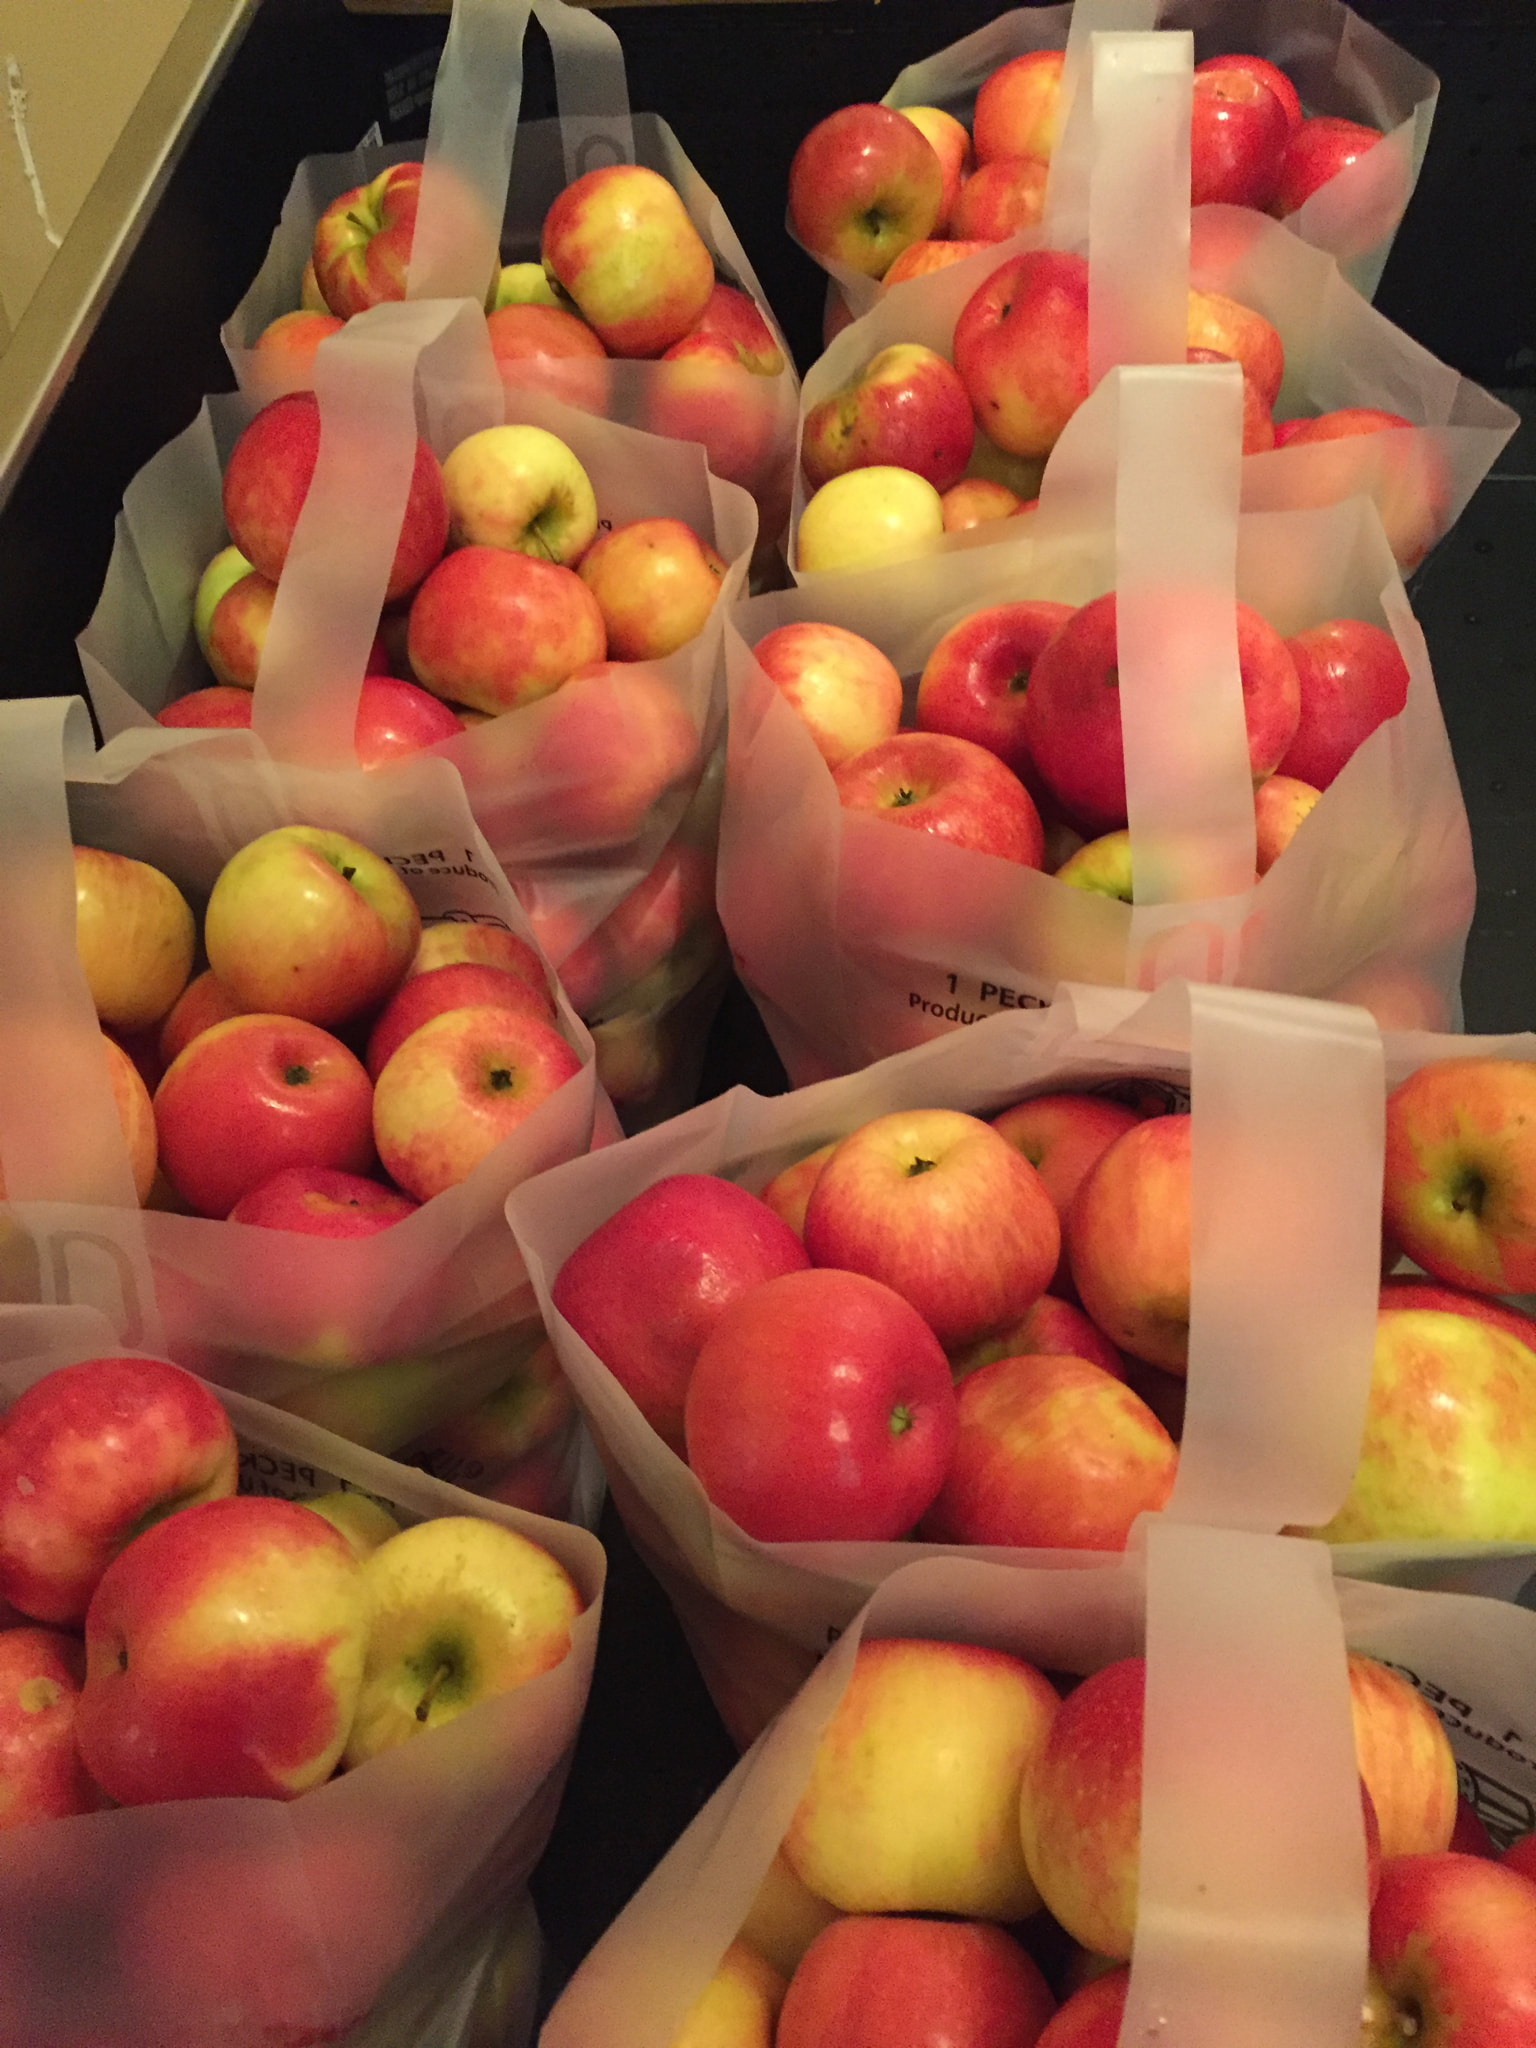 Apple Bags for Picking Apples / Pears (prepay for U-Pick)